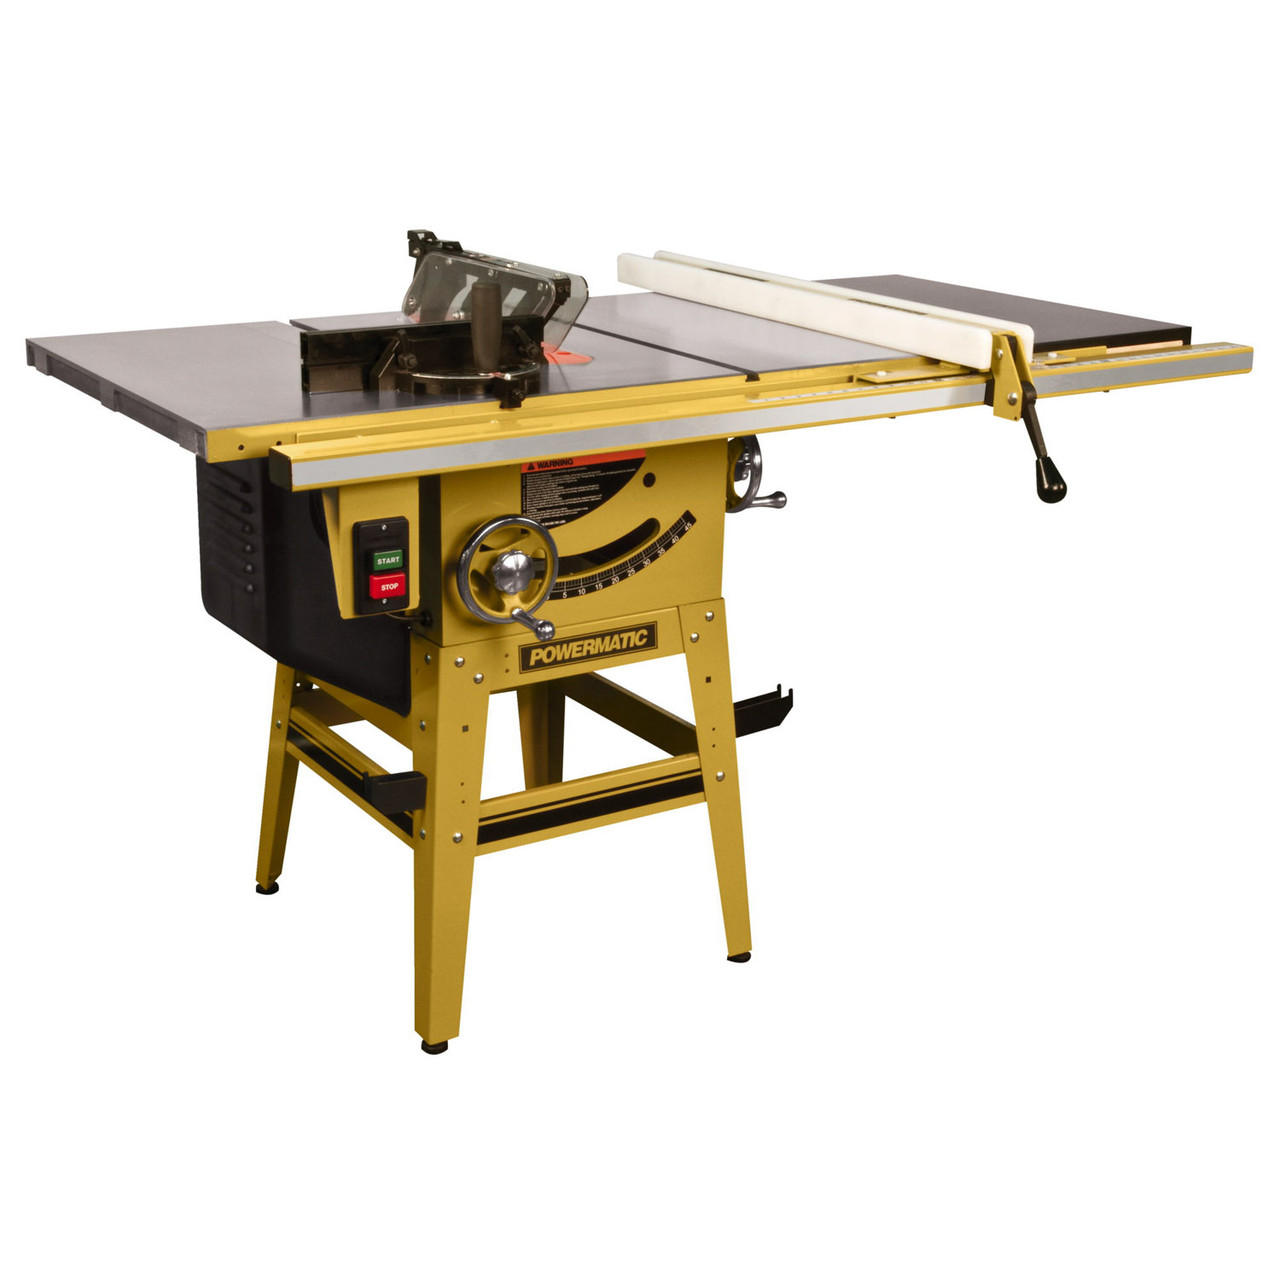 Powermatic, 64B, 30" Fence with Riving Knife, 1.75HP, 115/230V